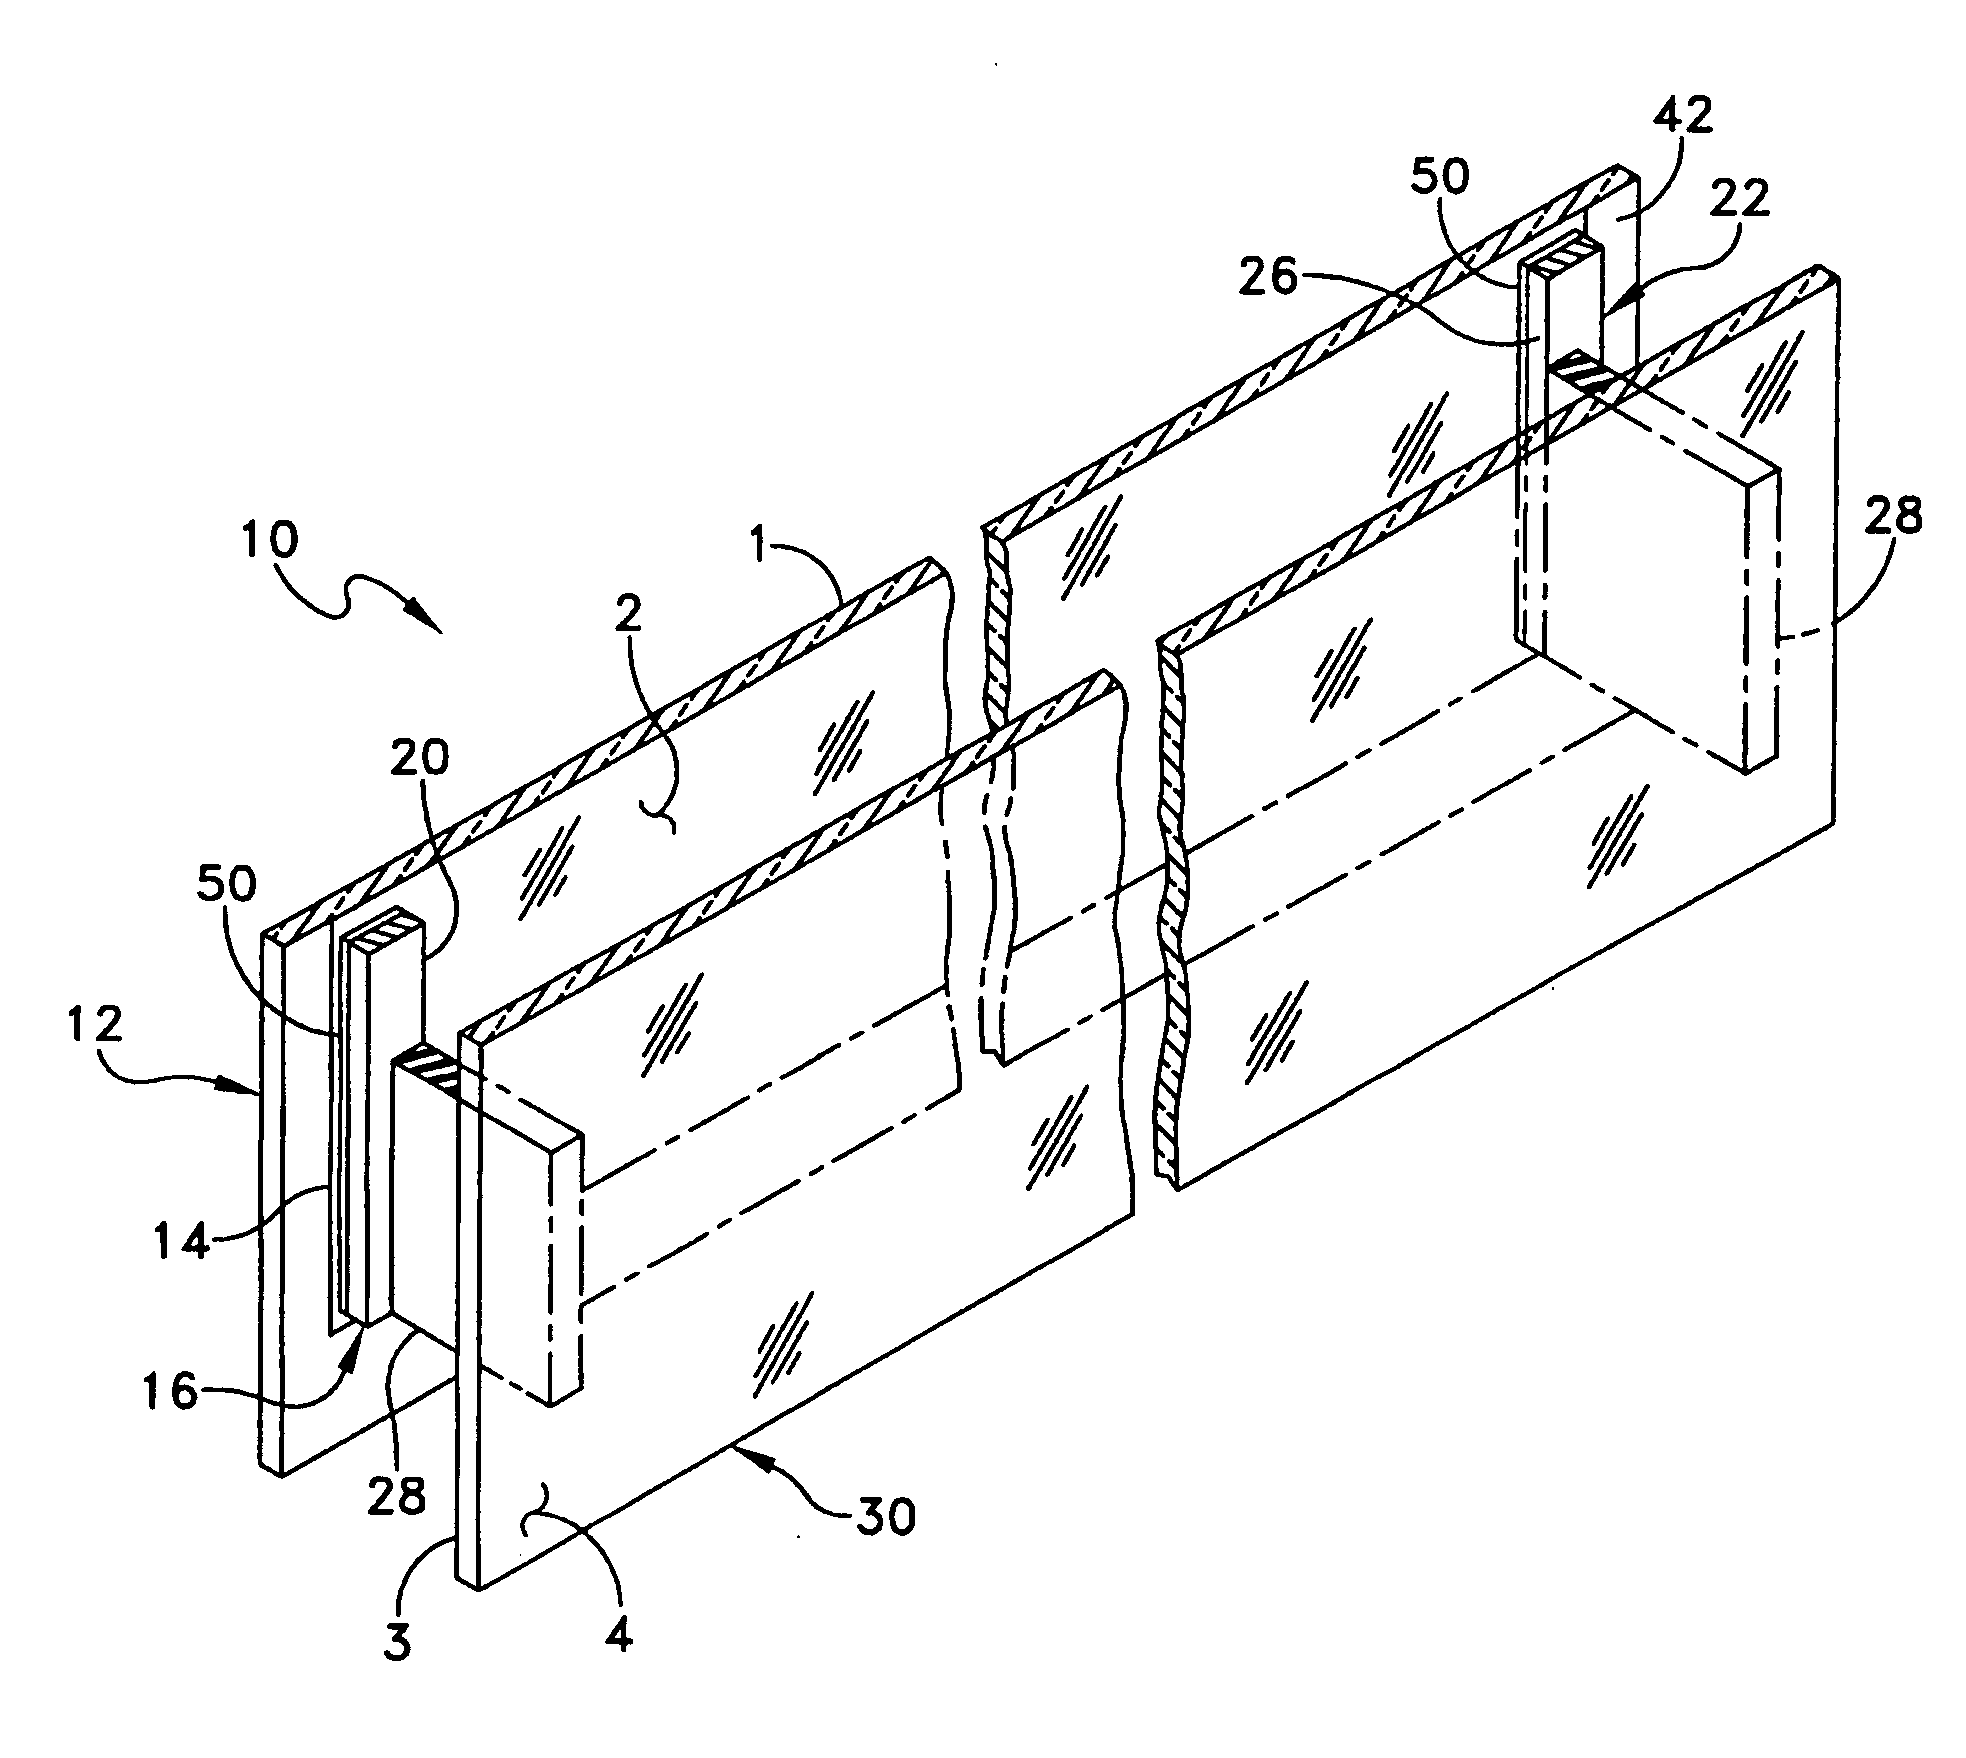 Heated glass panels and methods for making electrical contact with electro-conductive films